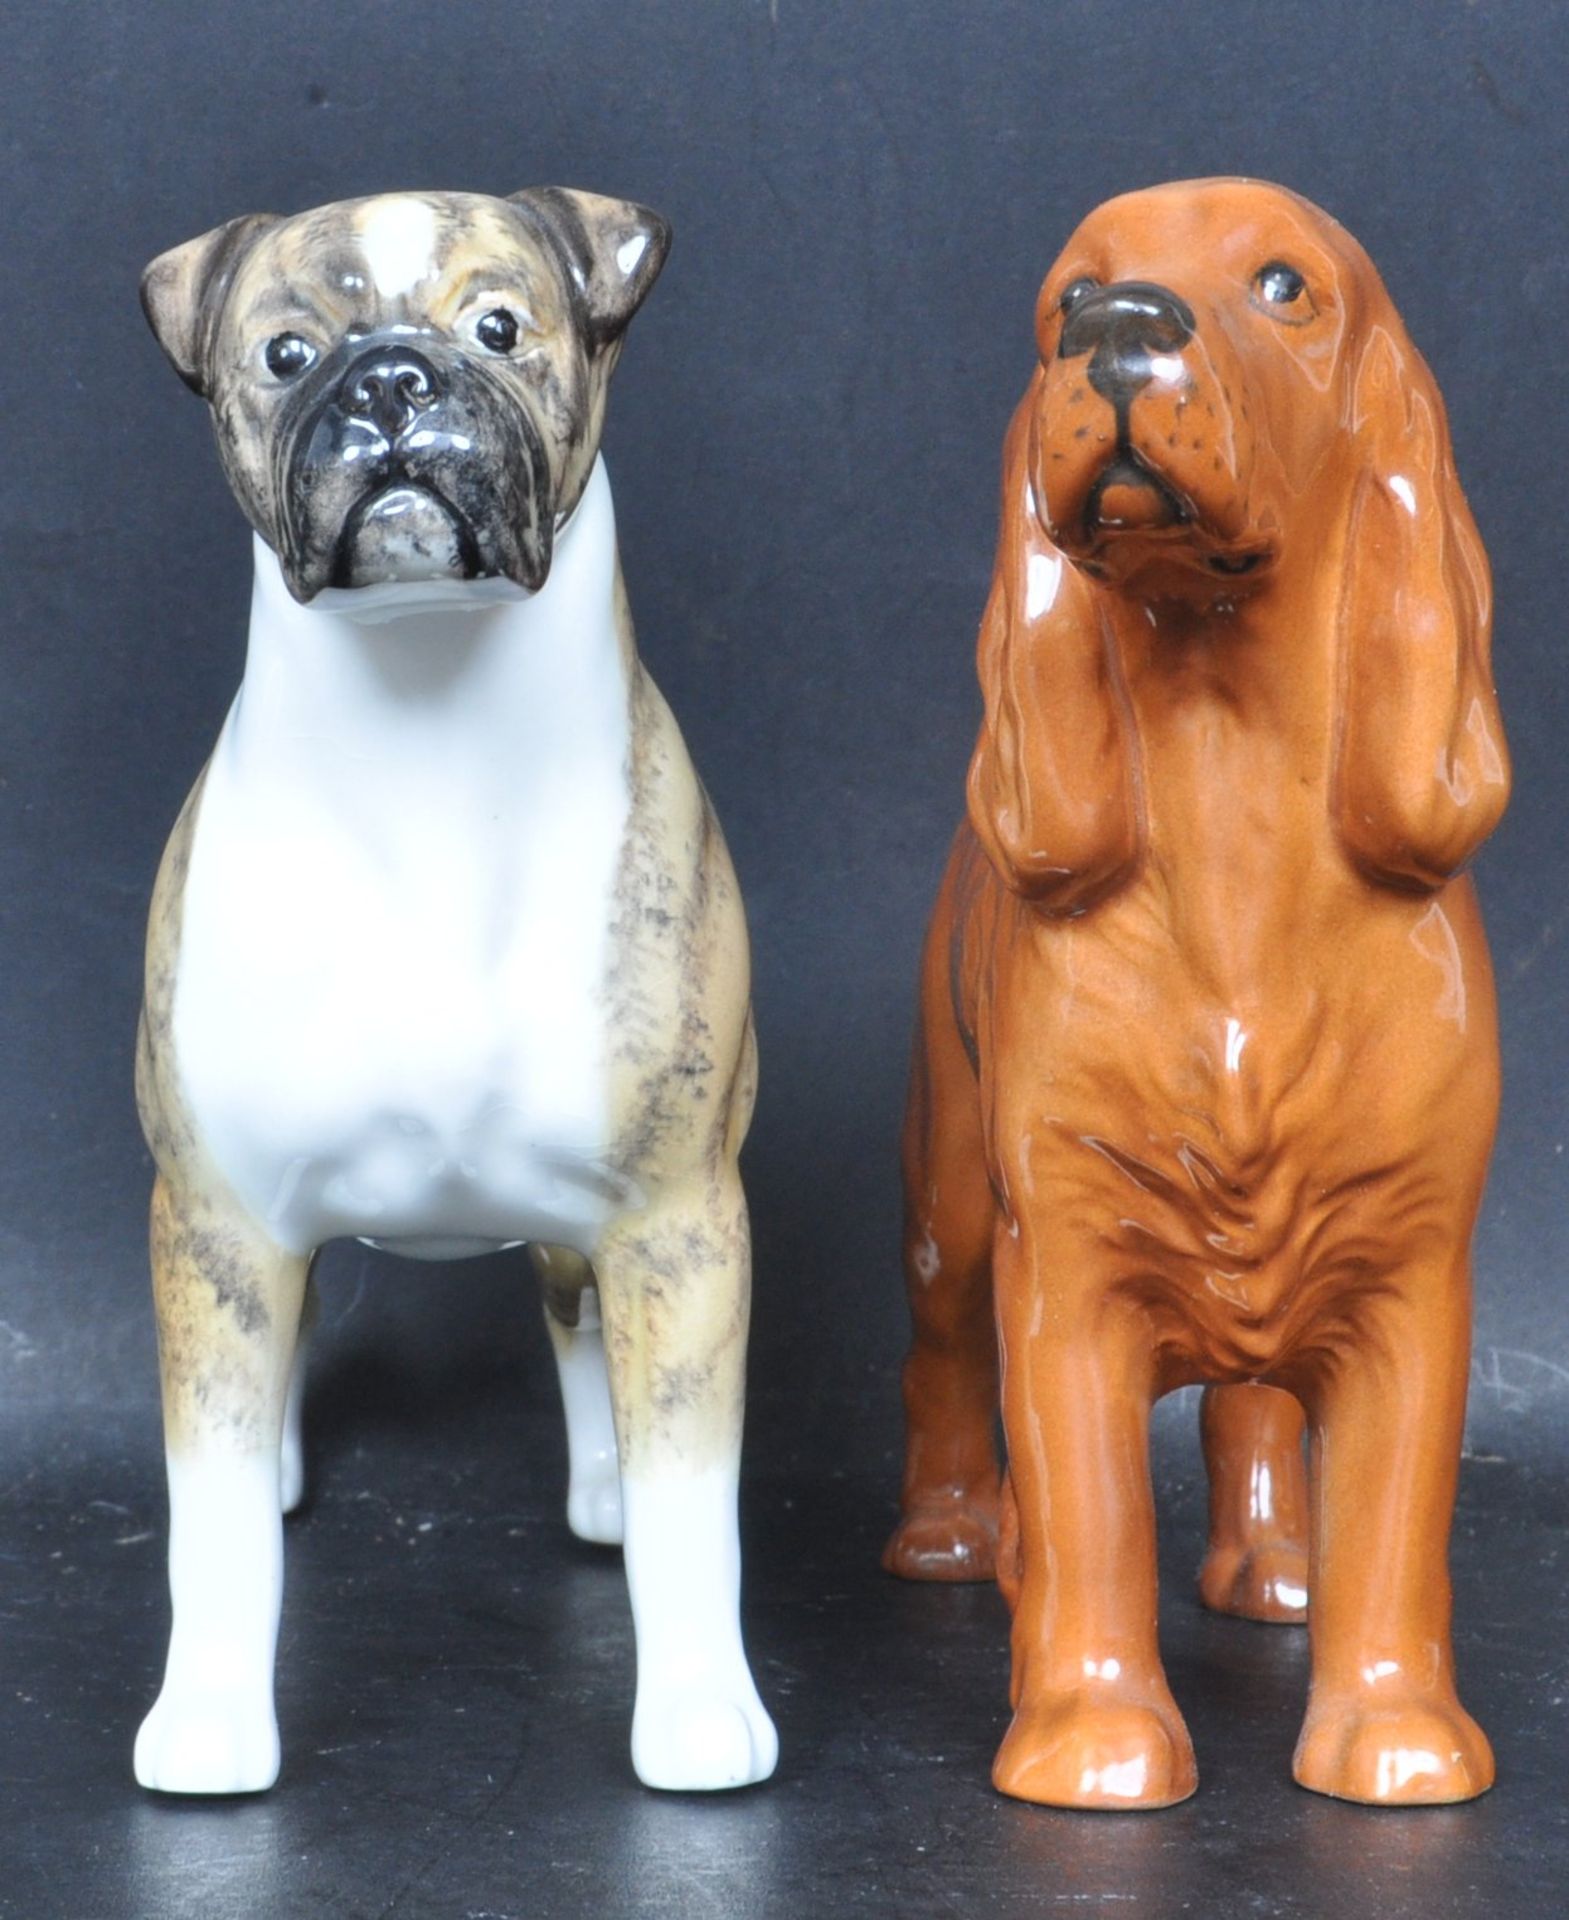 GROUP OF TWO CERAMIC PORCELAIN DOG FIGURINES BY BESWICK - Image 2 of 8